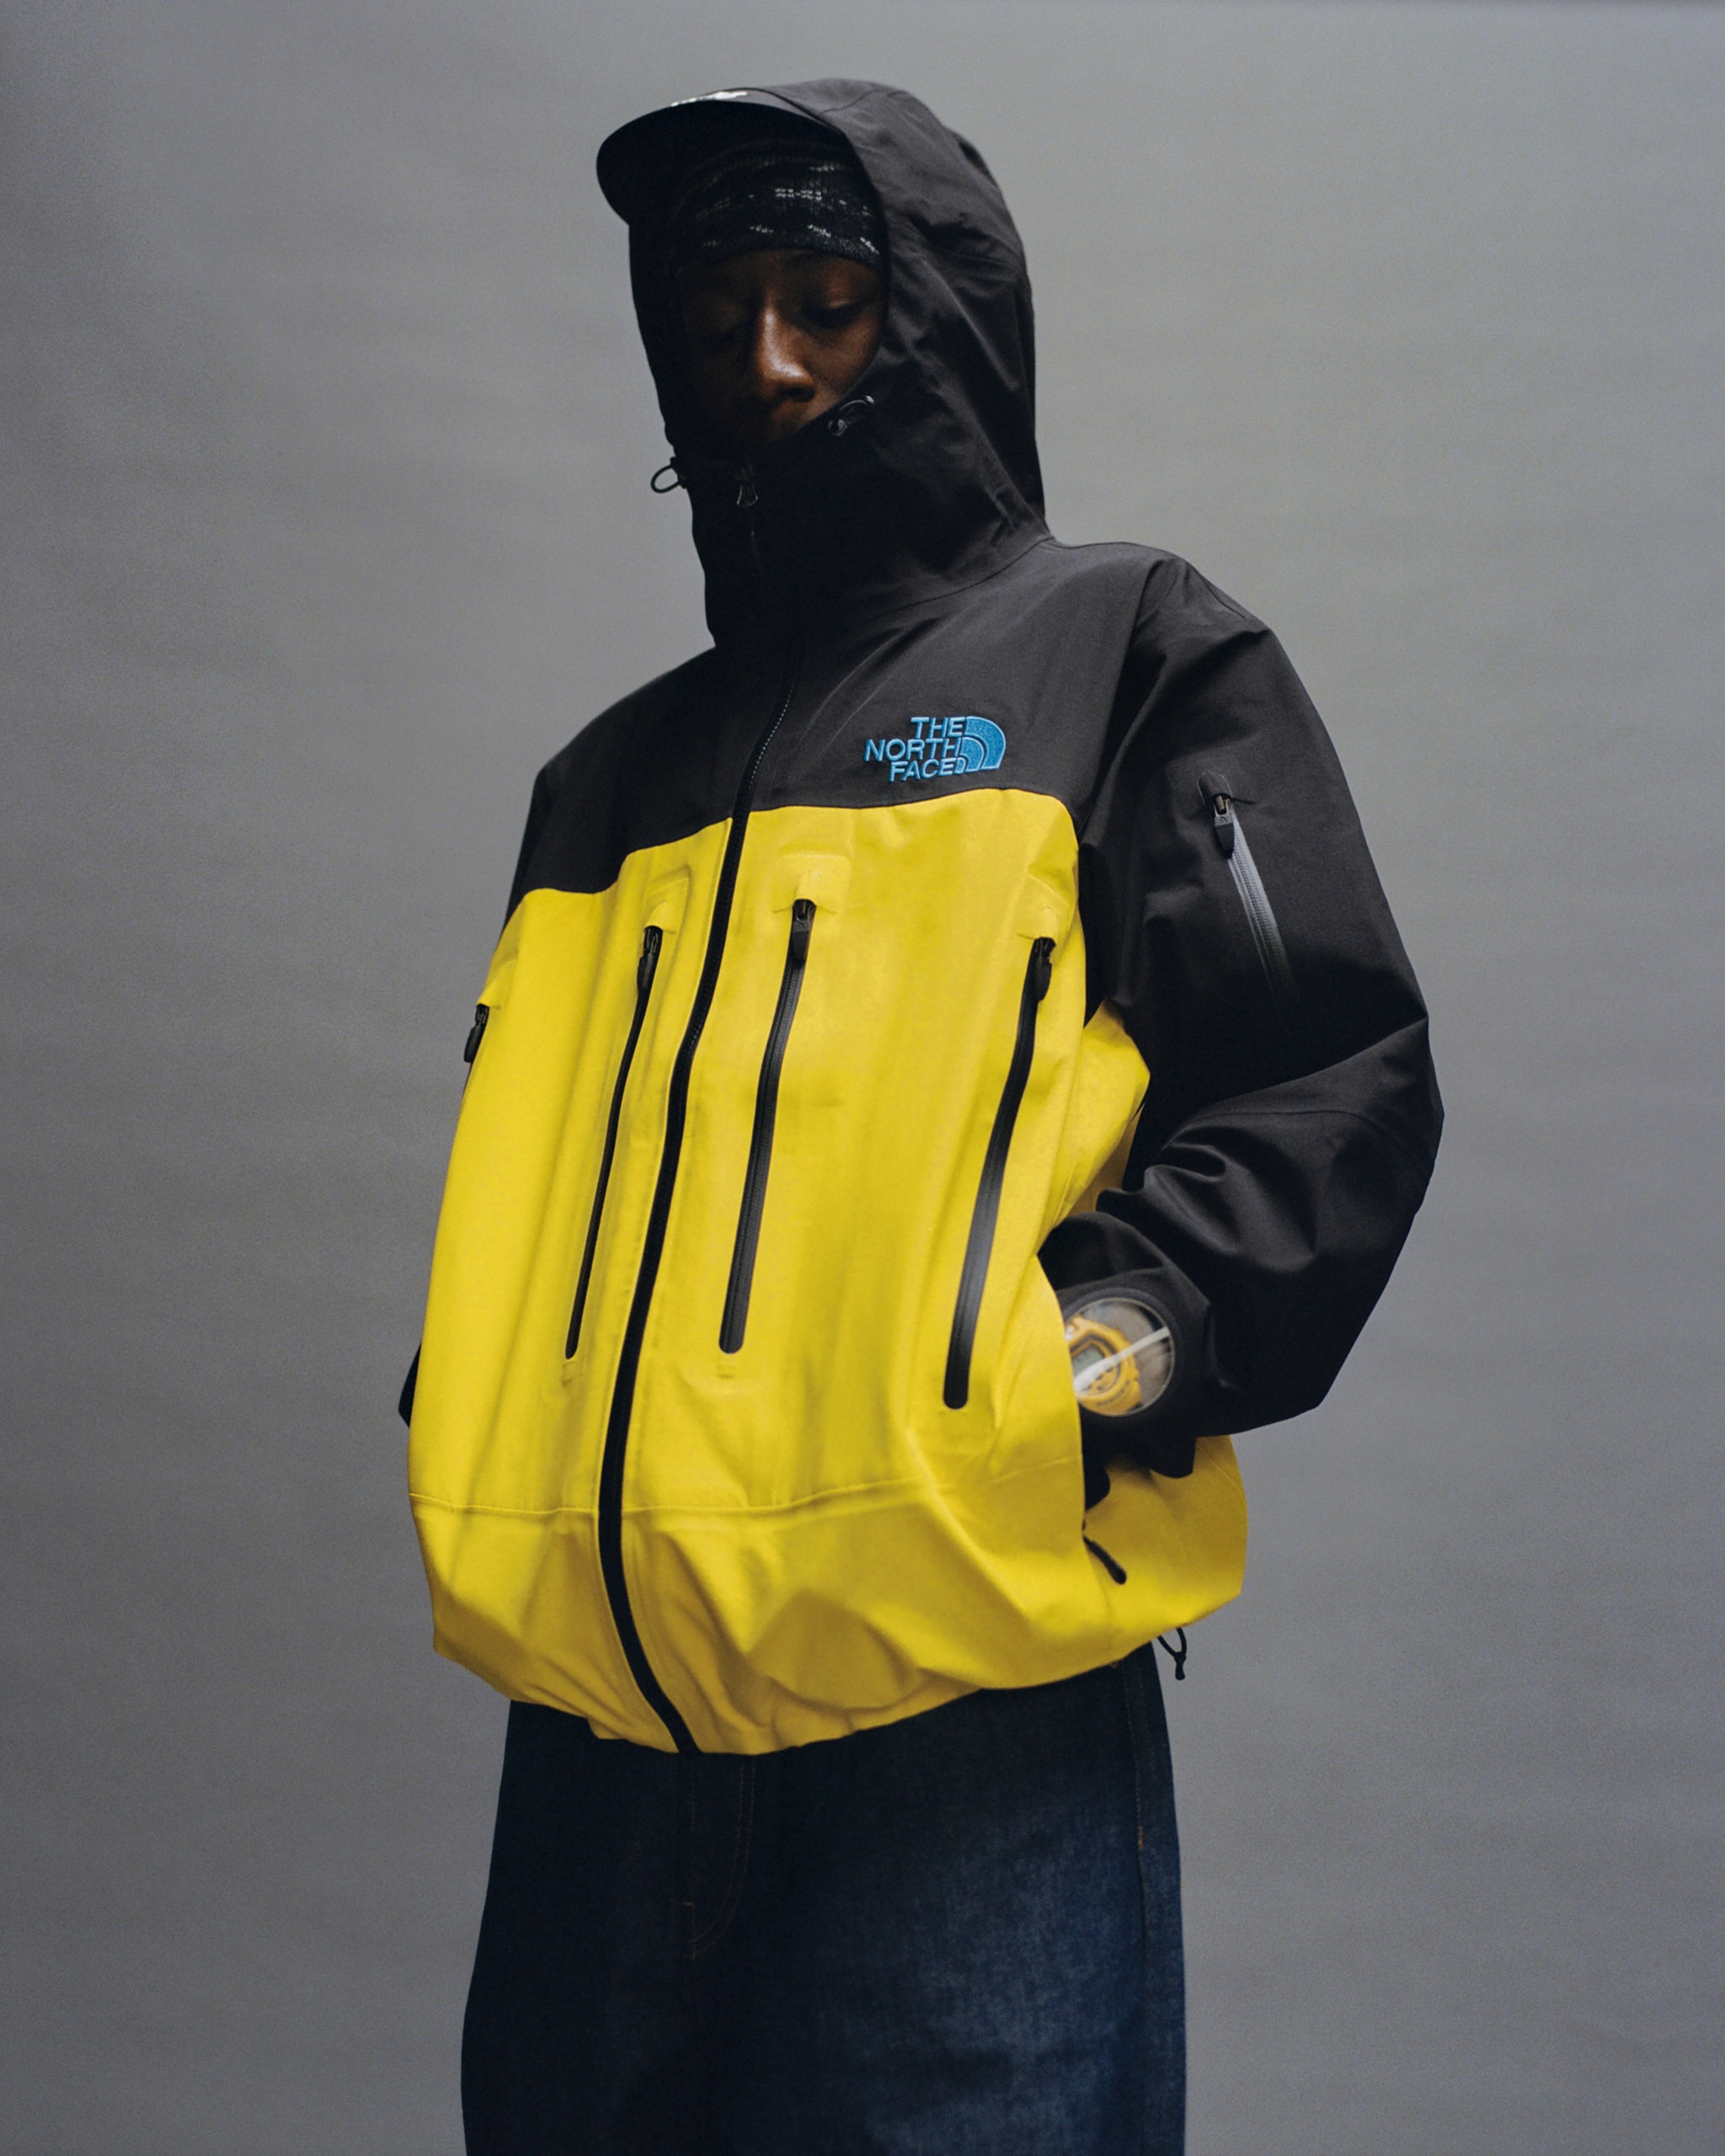 Supreme x The North Face 2022 冬季联名系列